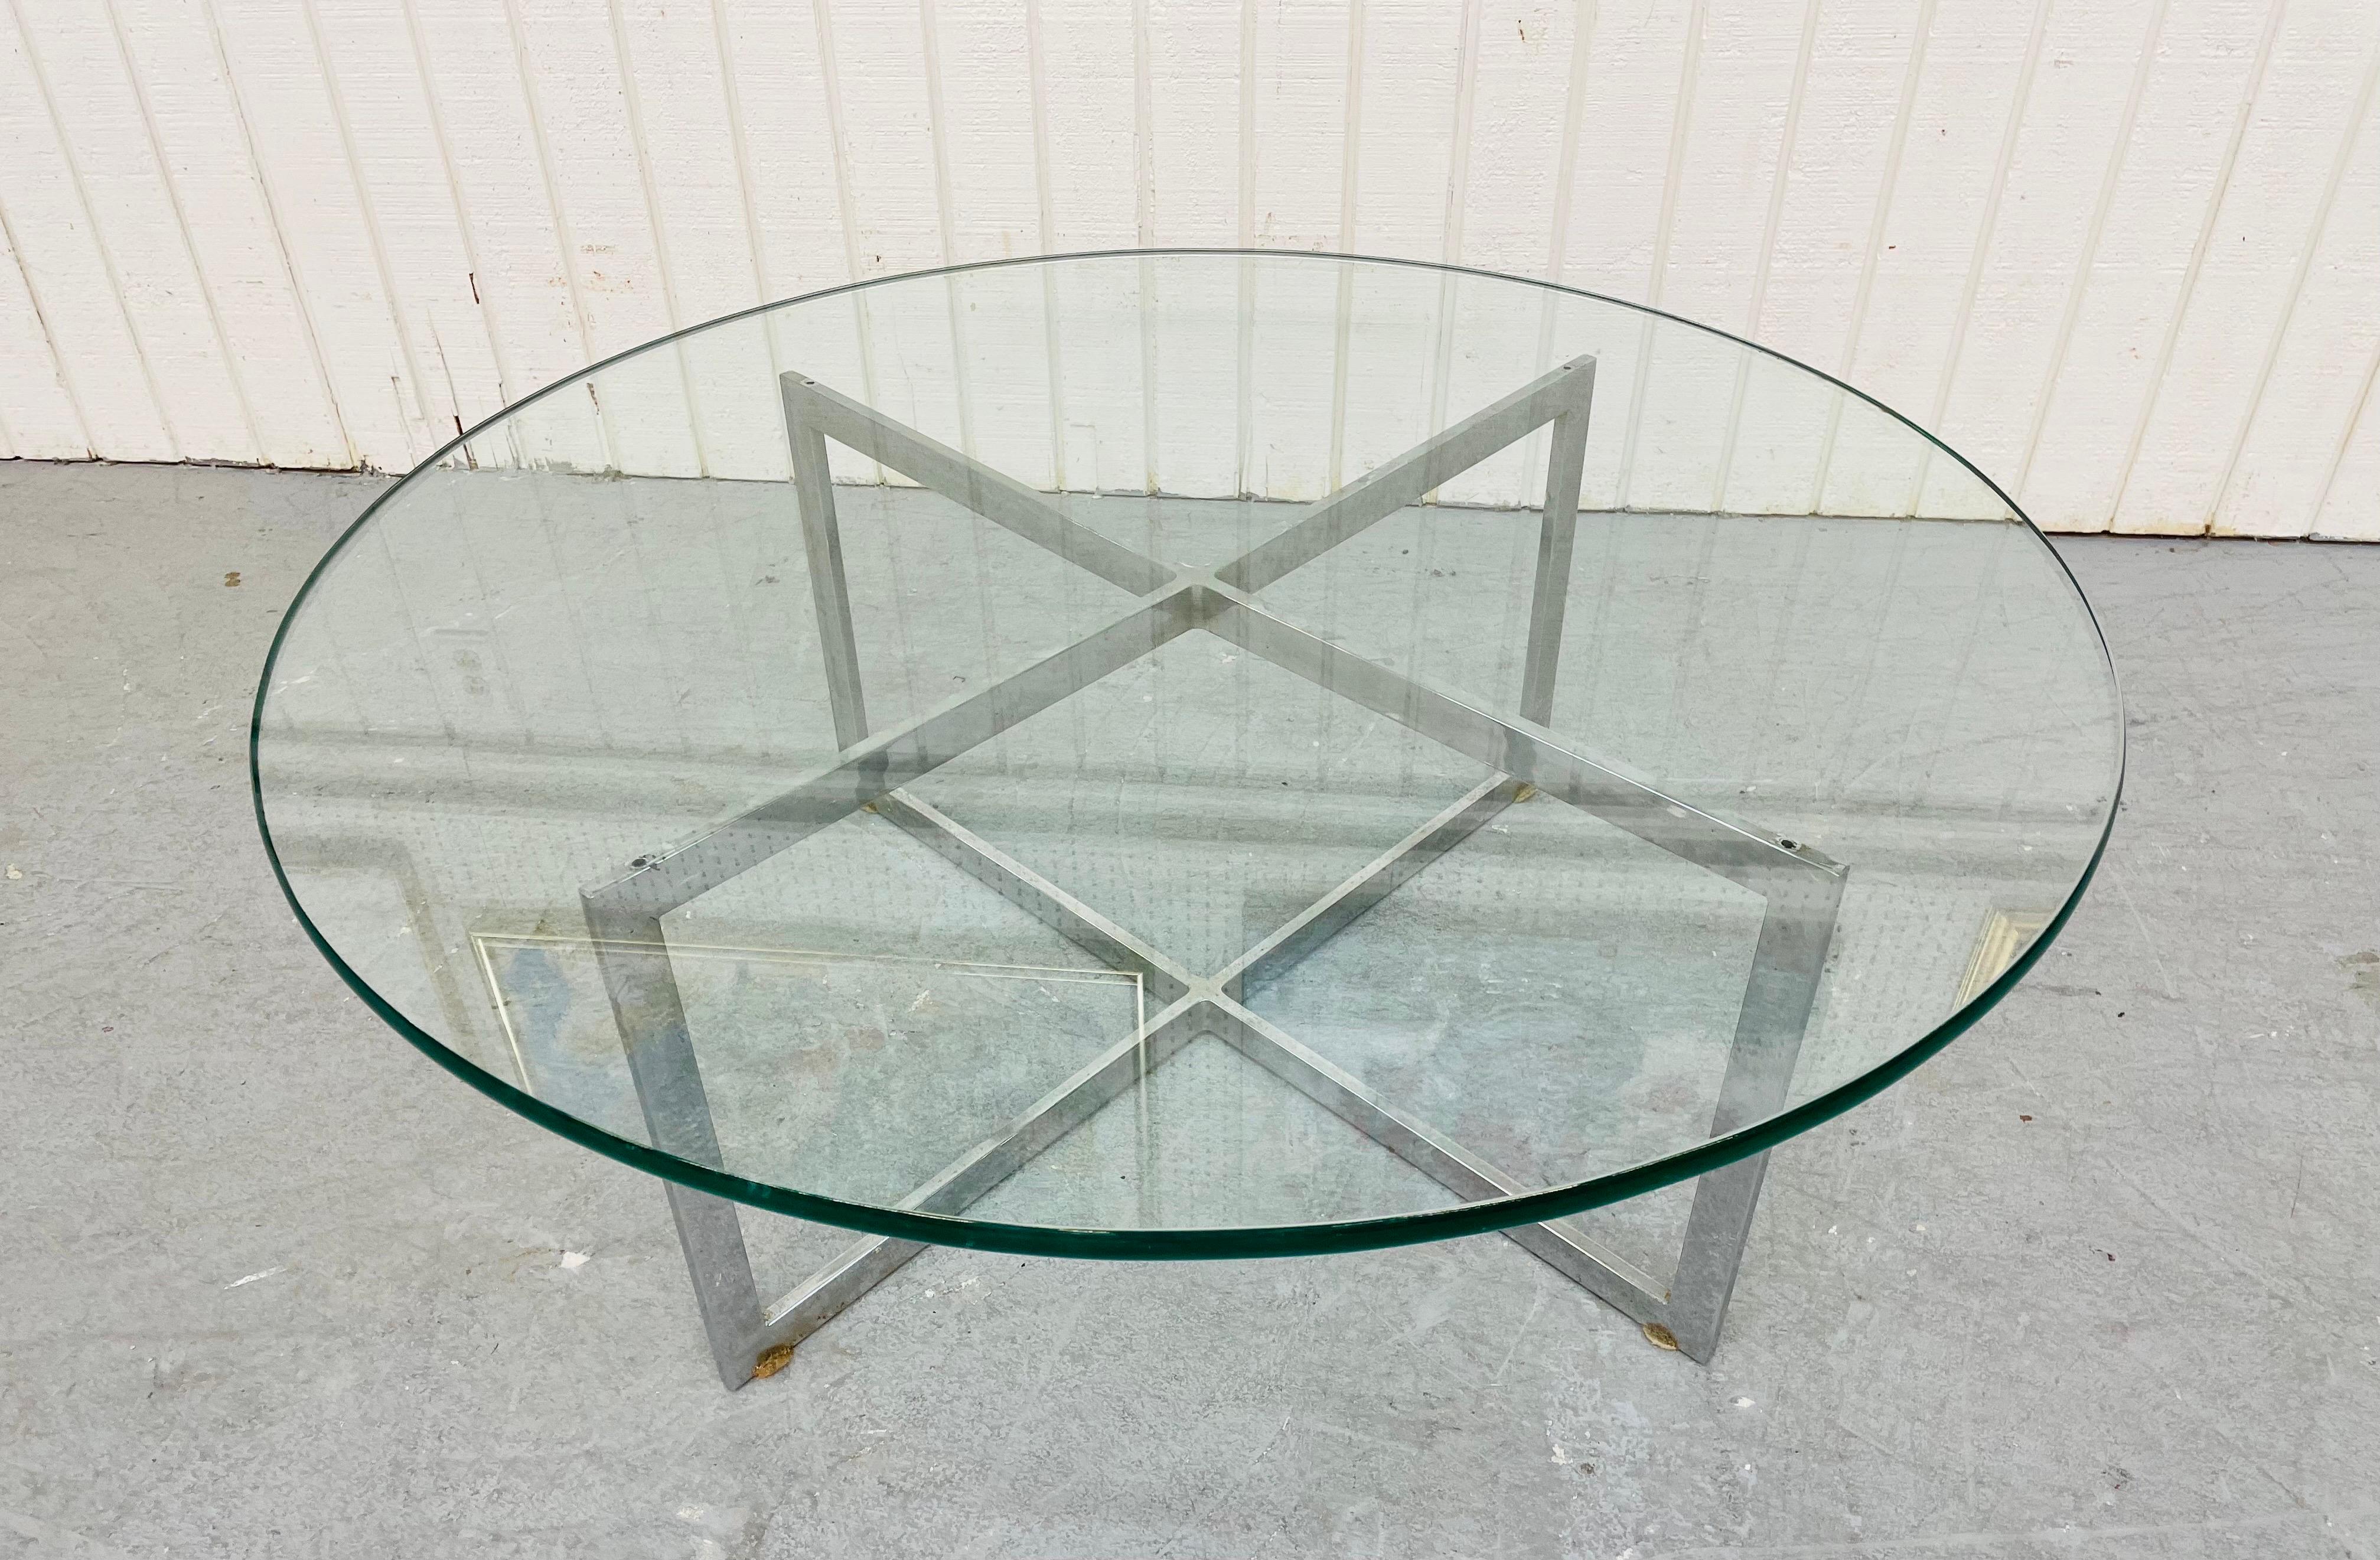 This listing is for a vintage Milo Baughman Style Flat Bar Chrome Glass Top Coffee Table. Featuring a thick round glass top and a crisscross flat bar chrome base.